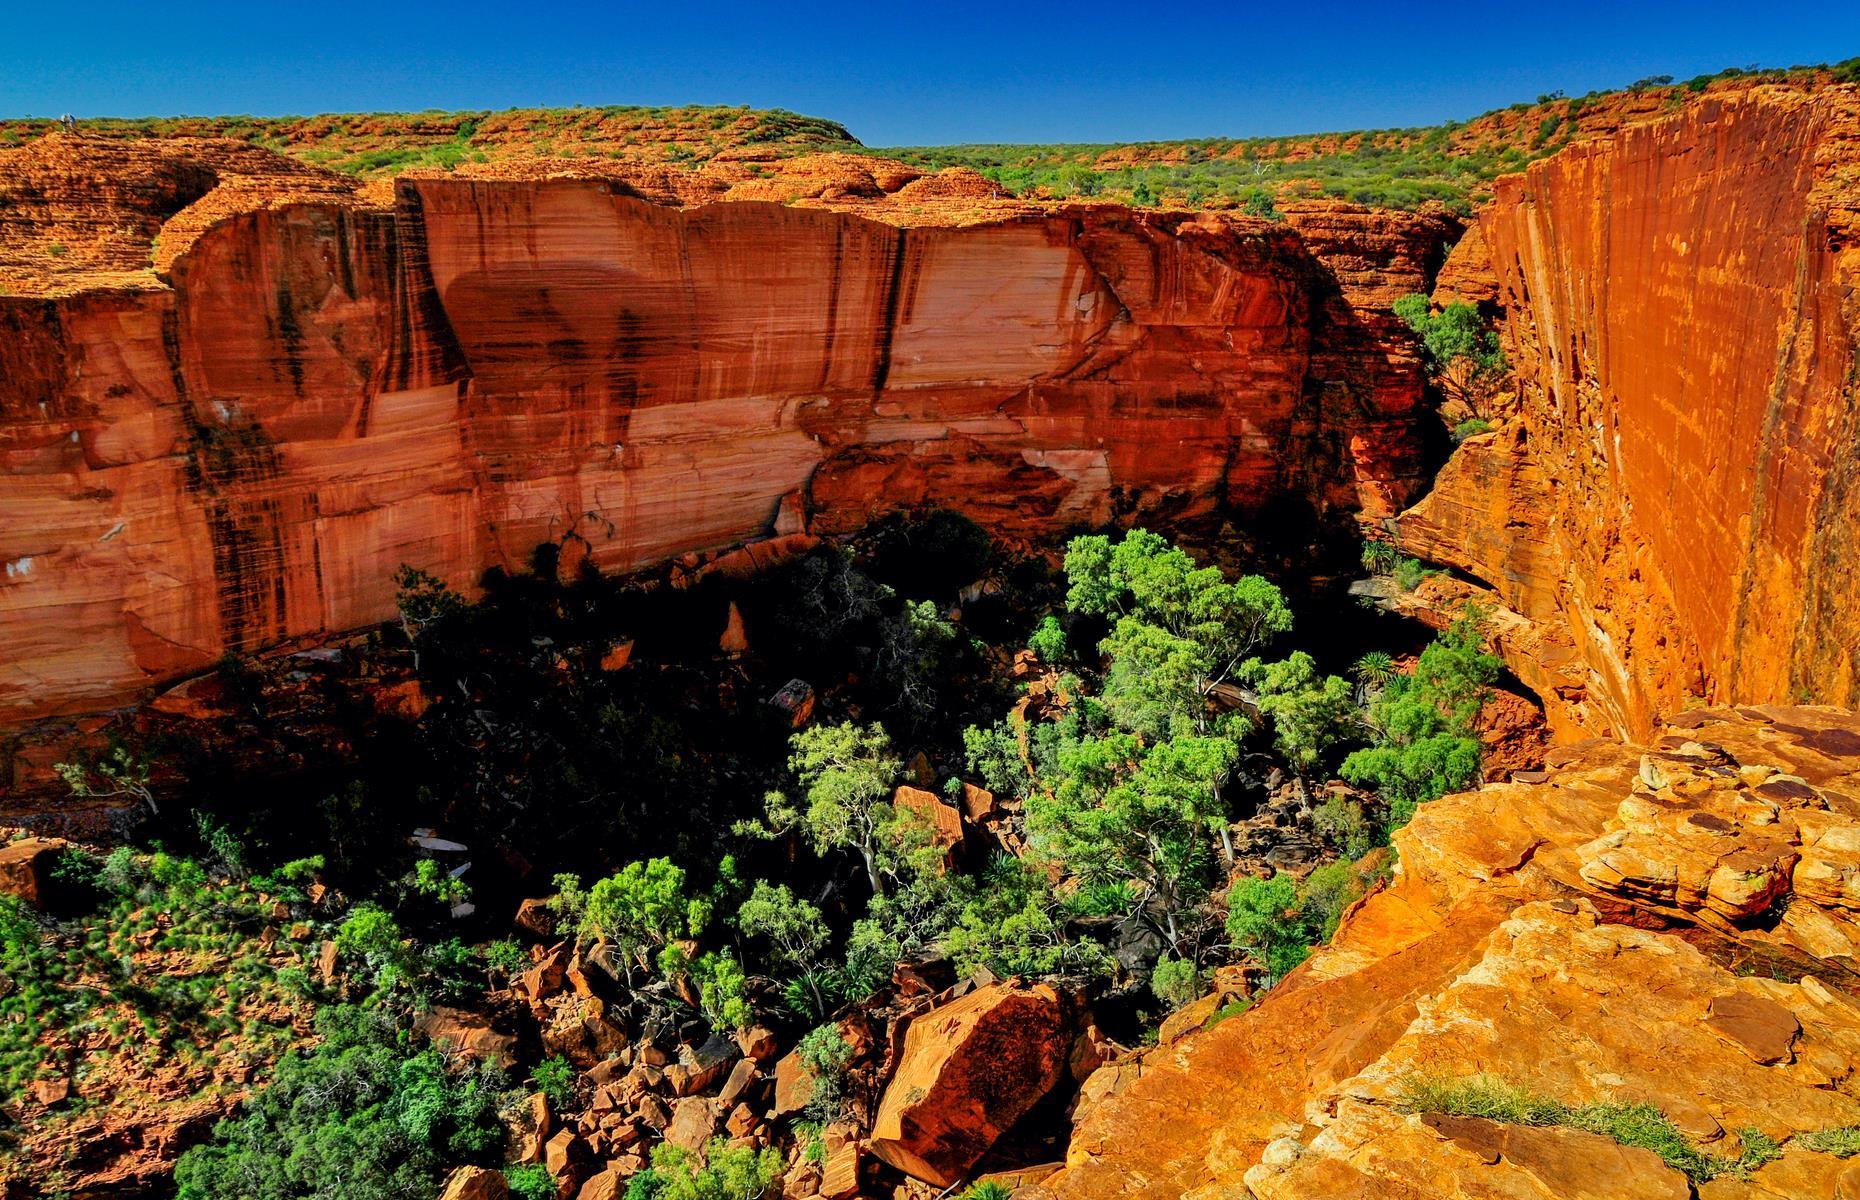 From vast coral reefs, endless deserts and surreal rock formations to ancient tangles of forests and spectacular coastlines, Australia has some of the world's most extraordinary and diverse landscapes and wildlife. Here are some of the country's most awe-inspiring natural wonders.